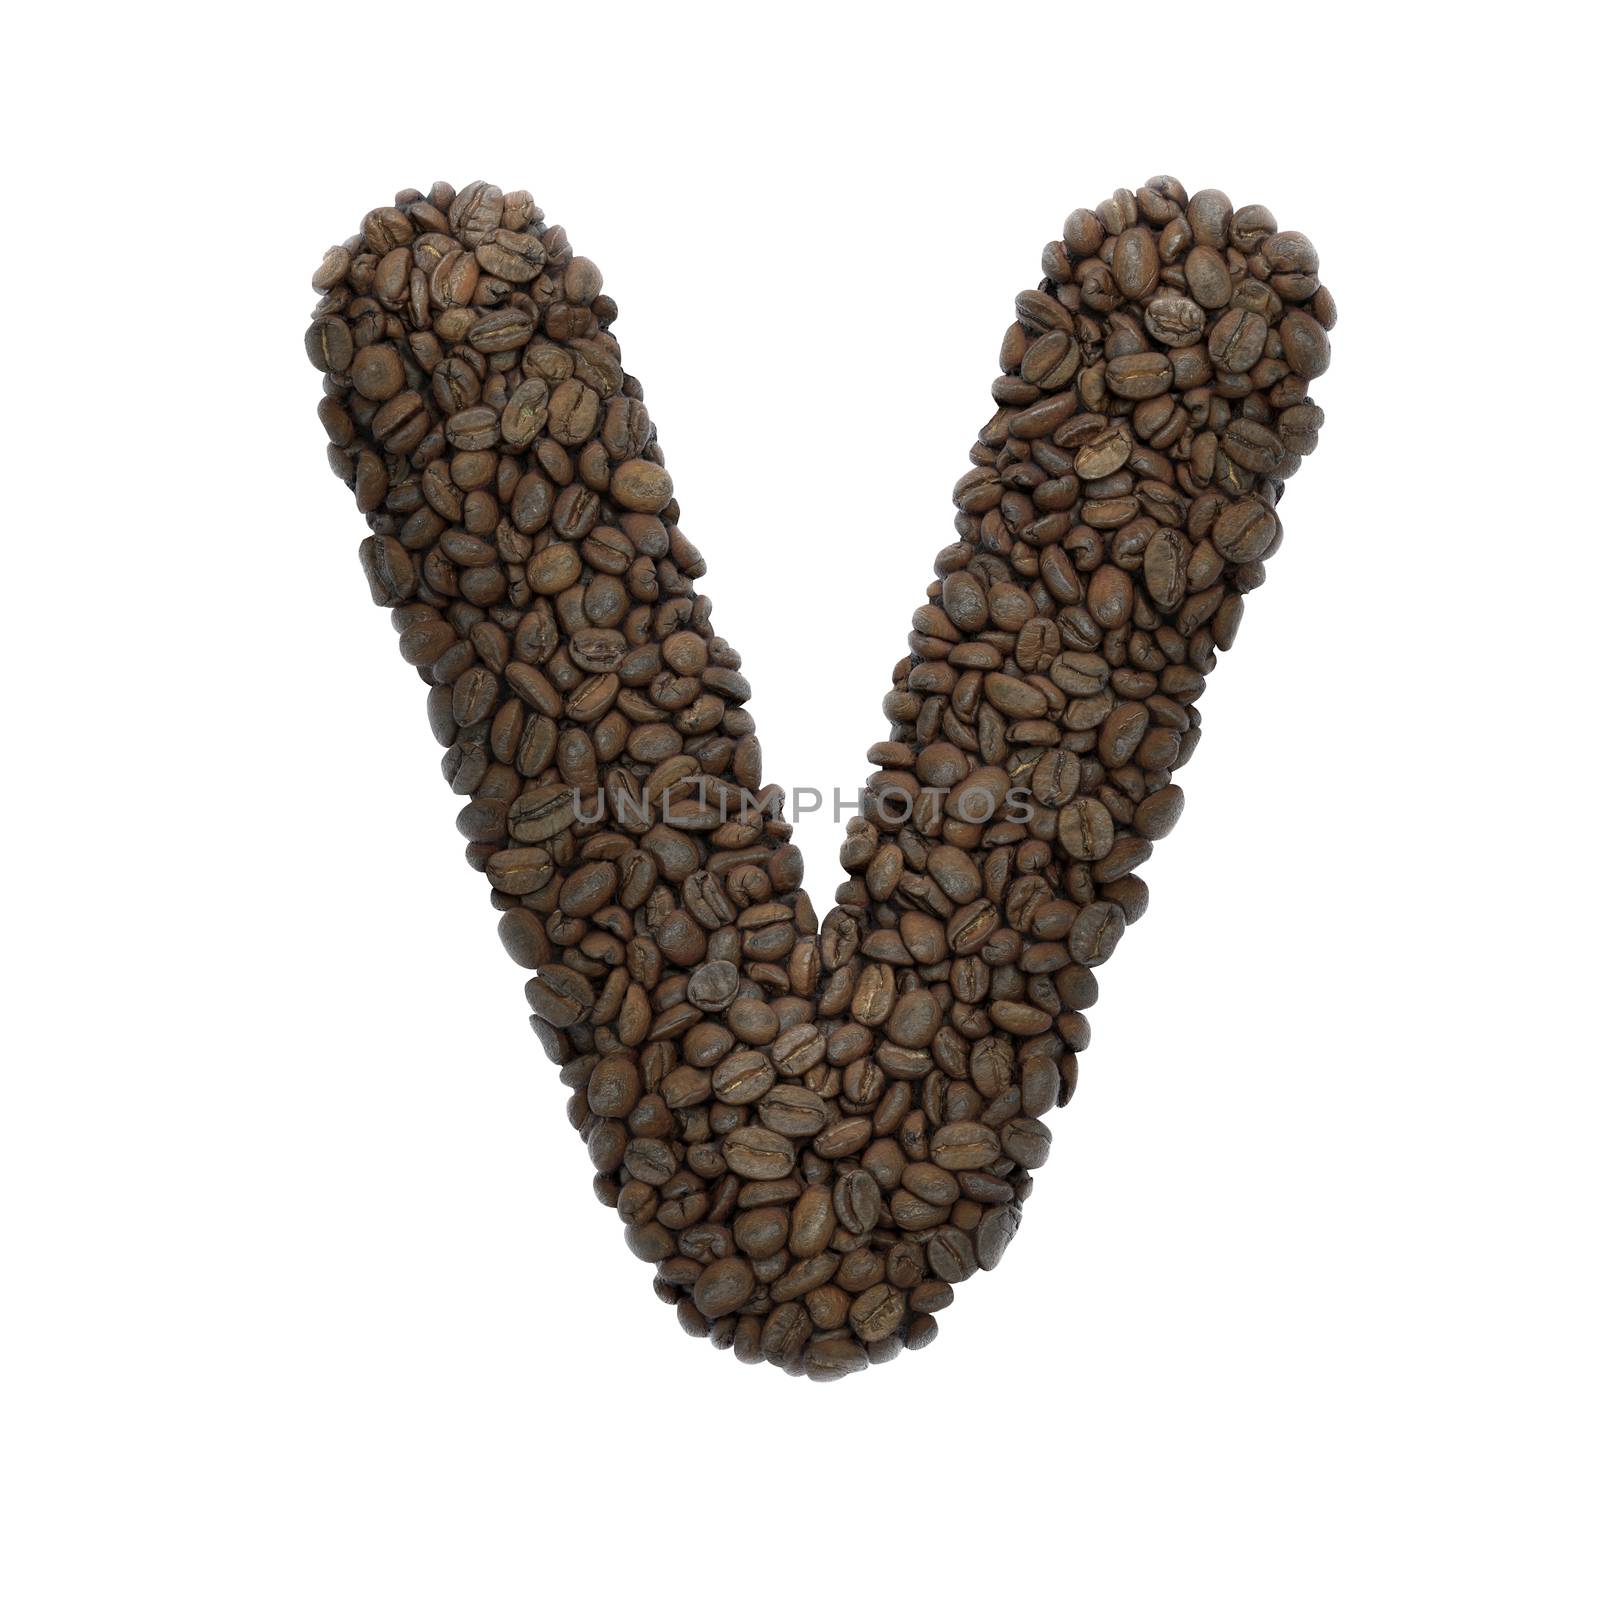 Coffee letter V - Upper-case 3d roasted beans font - suitable for Coffee, energy or insomnia related subjects by chrisroll